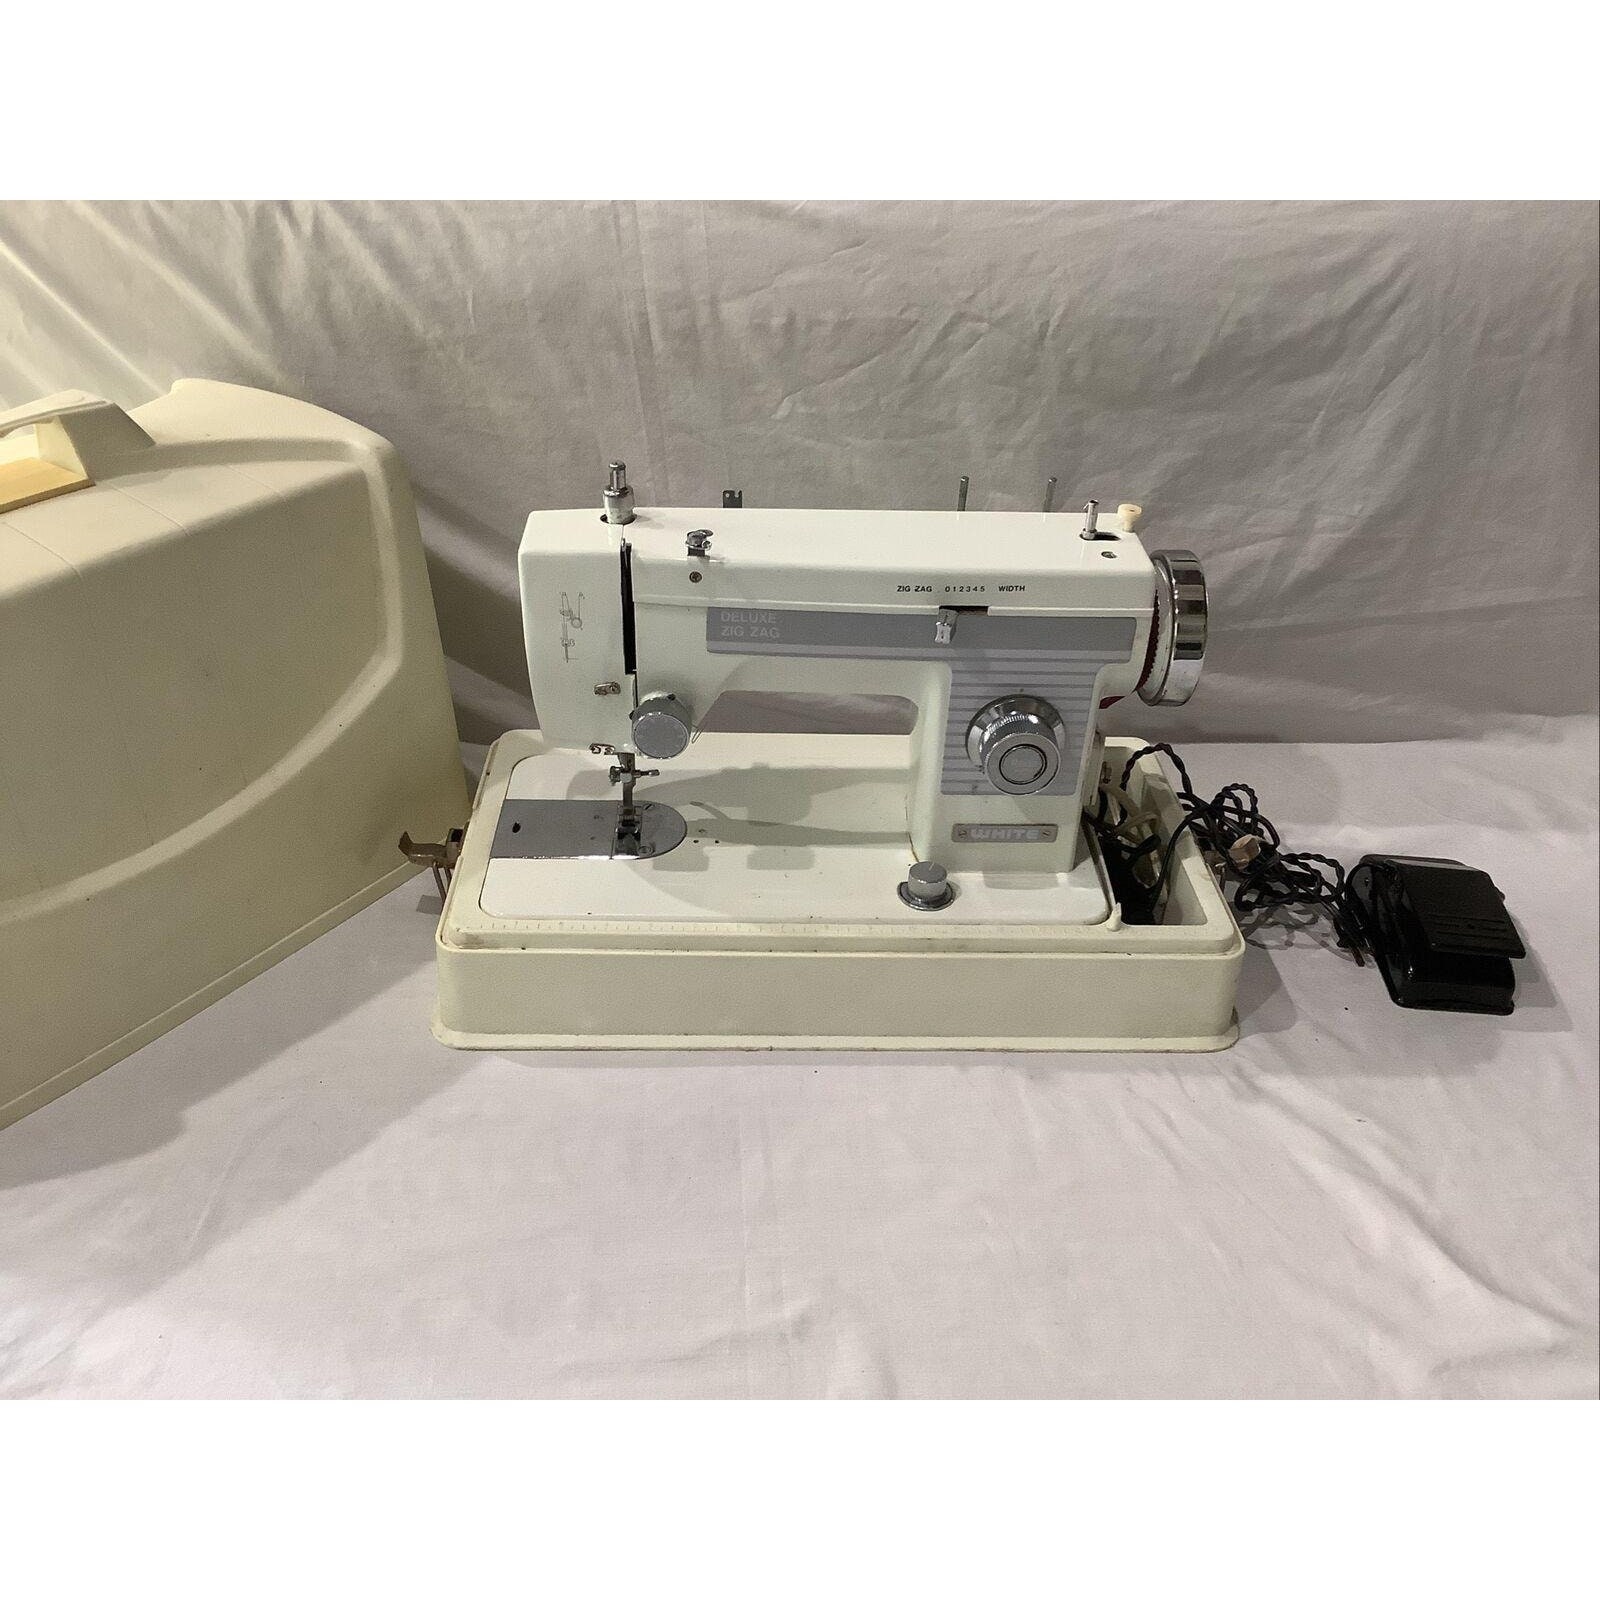 White Deluxe Zig Zag Sewing Machine 844 With Foot pedal and case